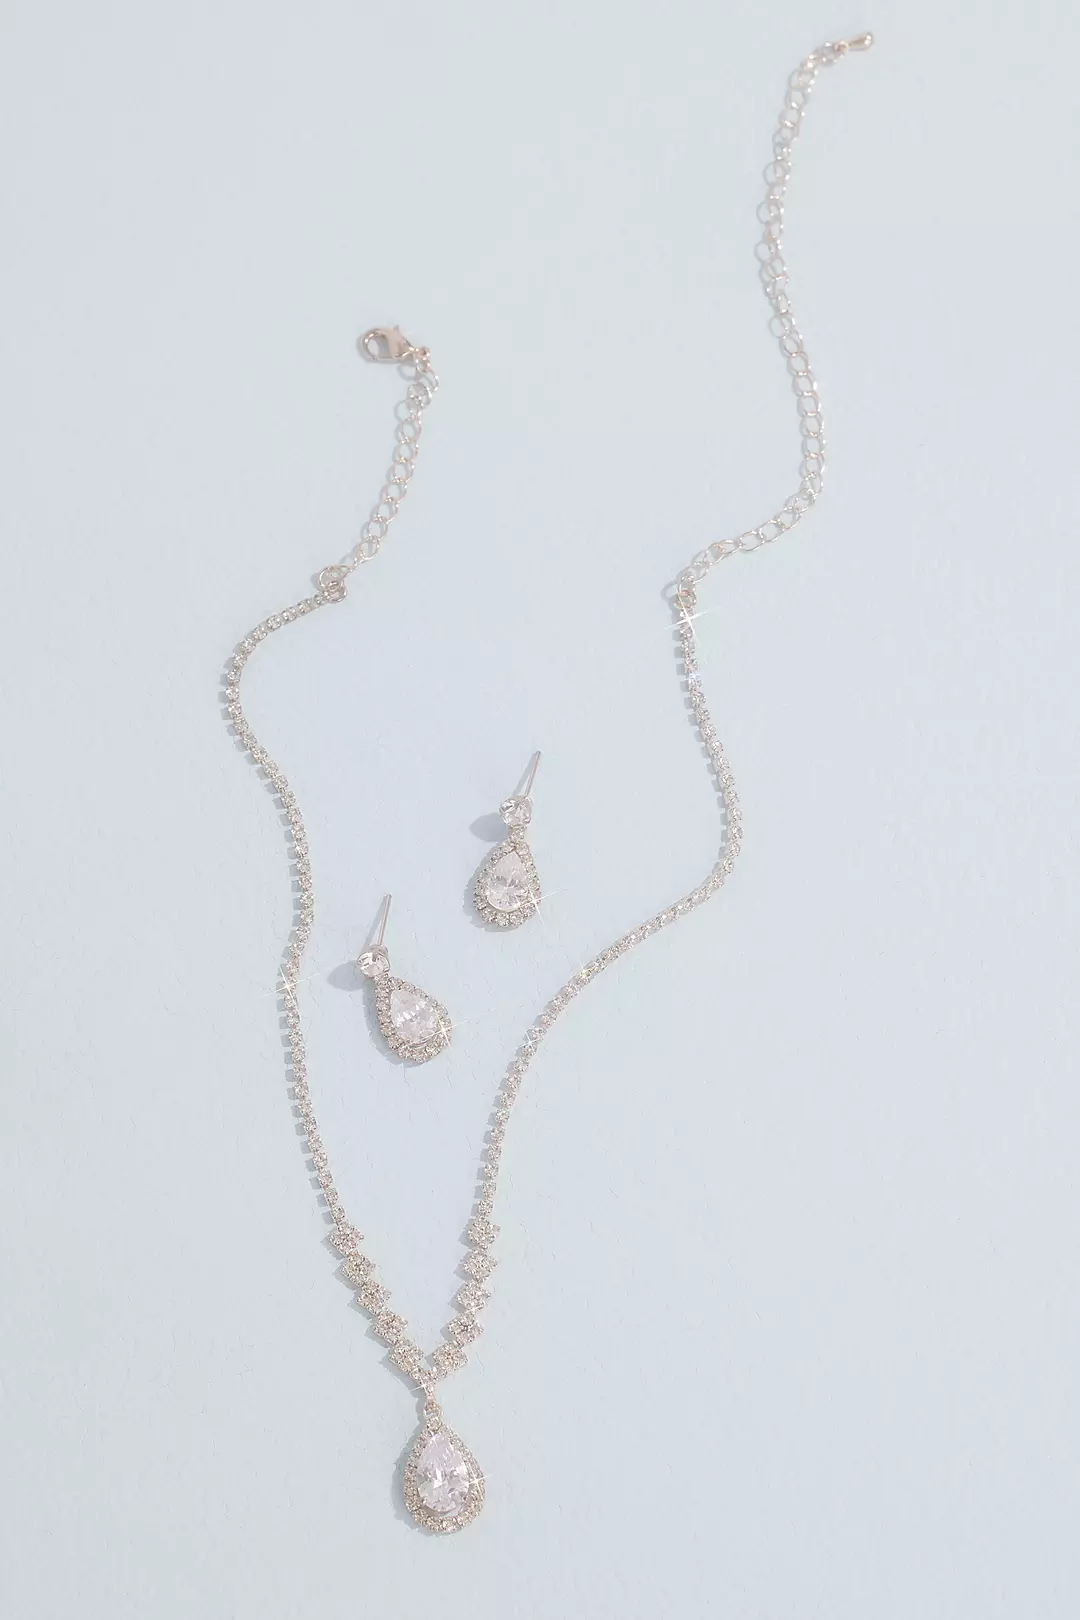 Teardrop Crystal Necklace and Earring Set Image